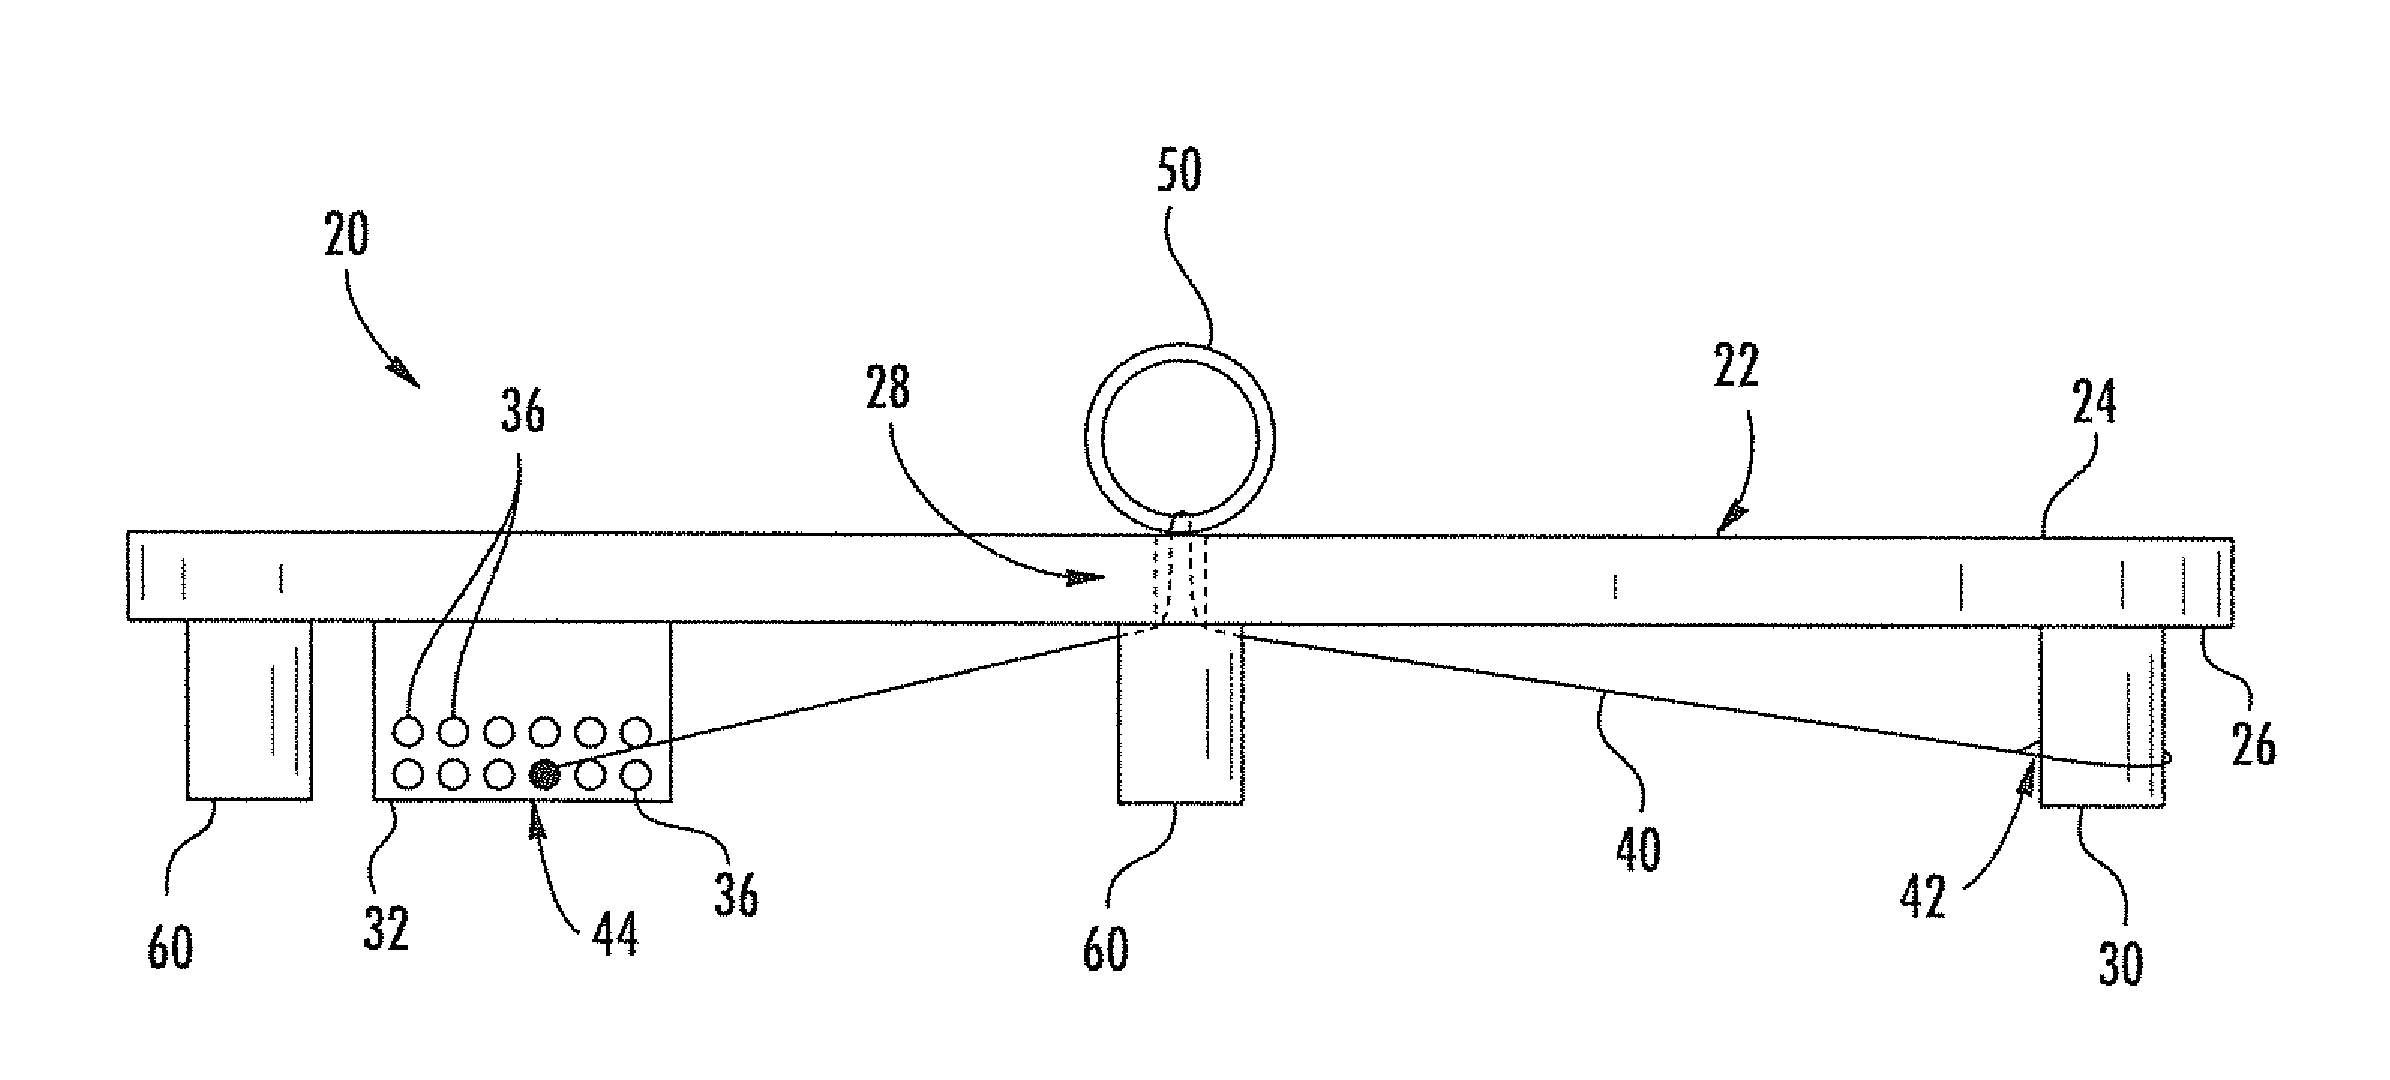 Jewelry ring display apparatus and associated methods